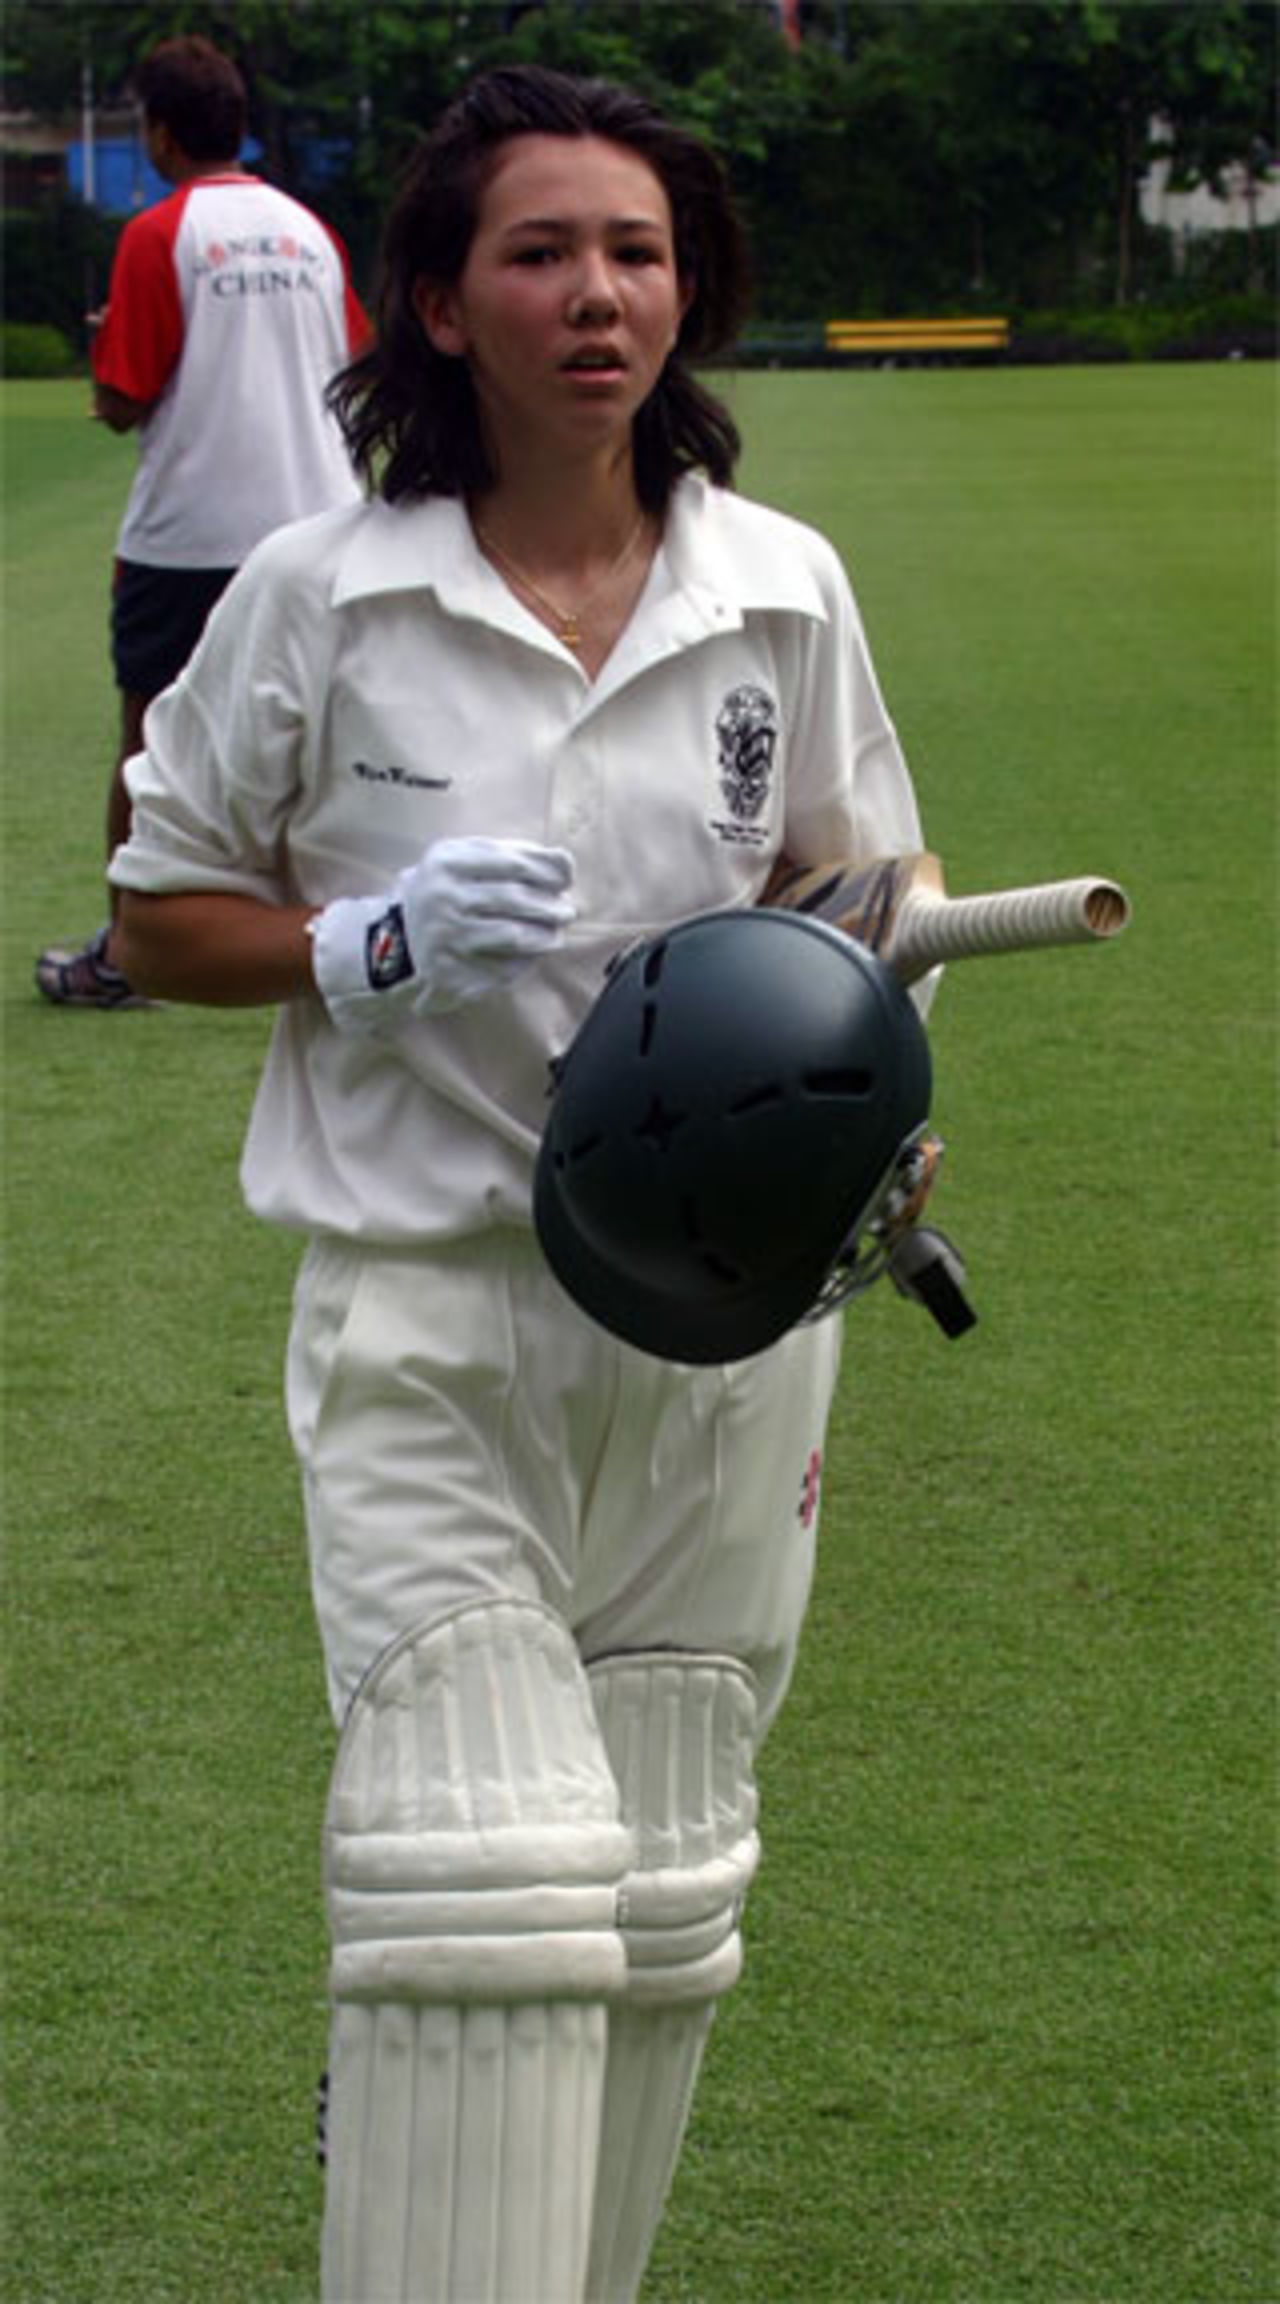 Natasha Miles batting for HKCC against KCC in the Woman's Centenary Match (12.09.2004)